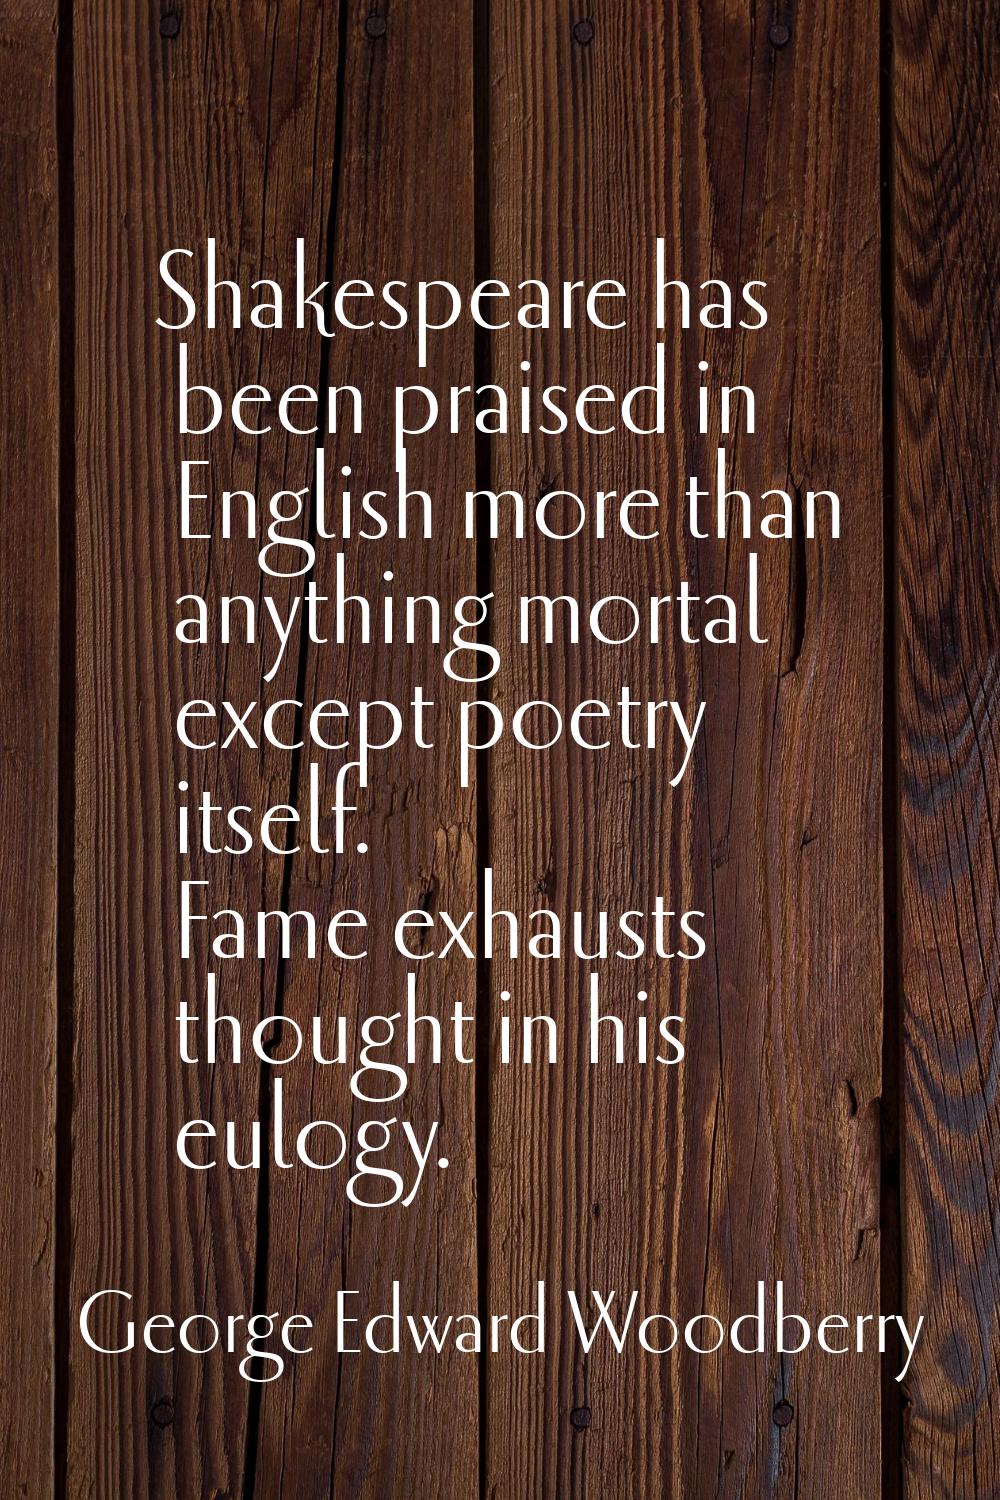 Shakespeare has been praised in English more than anything mortal except poetry itself. Fame exhaus